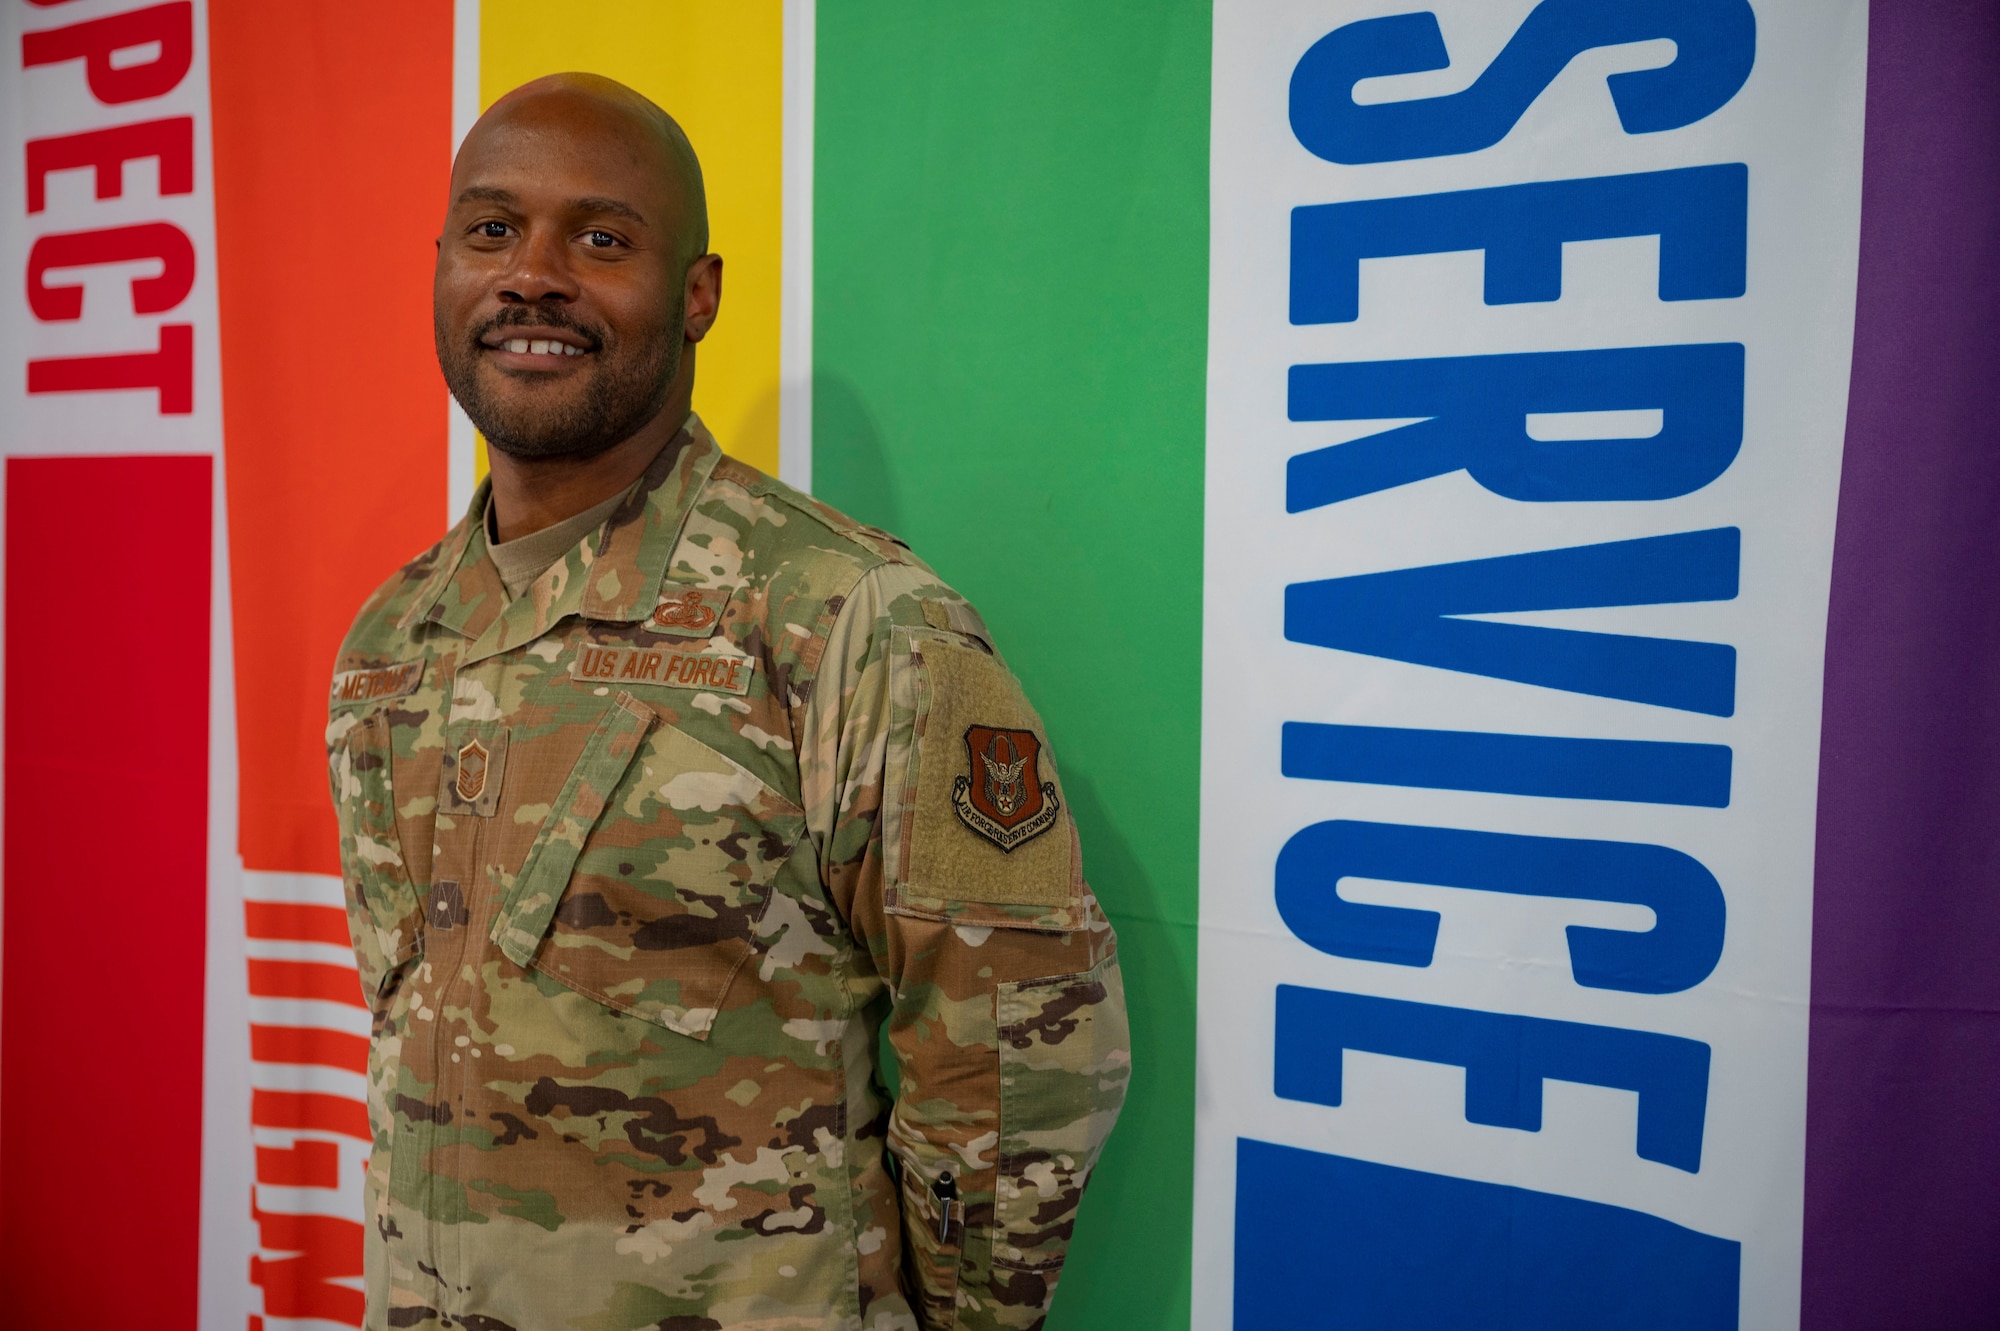 Senior Master Sgt. Ashley Metcalf, 926th Force Support Squadron, sustainment services flight chief, during a LGBT+ Panel event for Pride Month, June 23, at Nellis Air Force Base, Nevada.